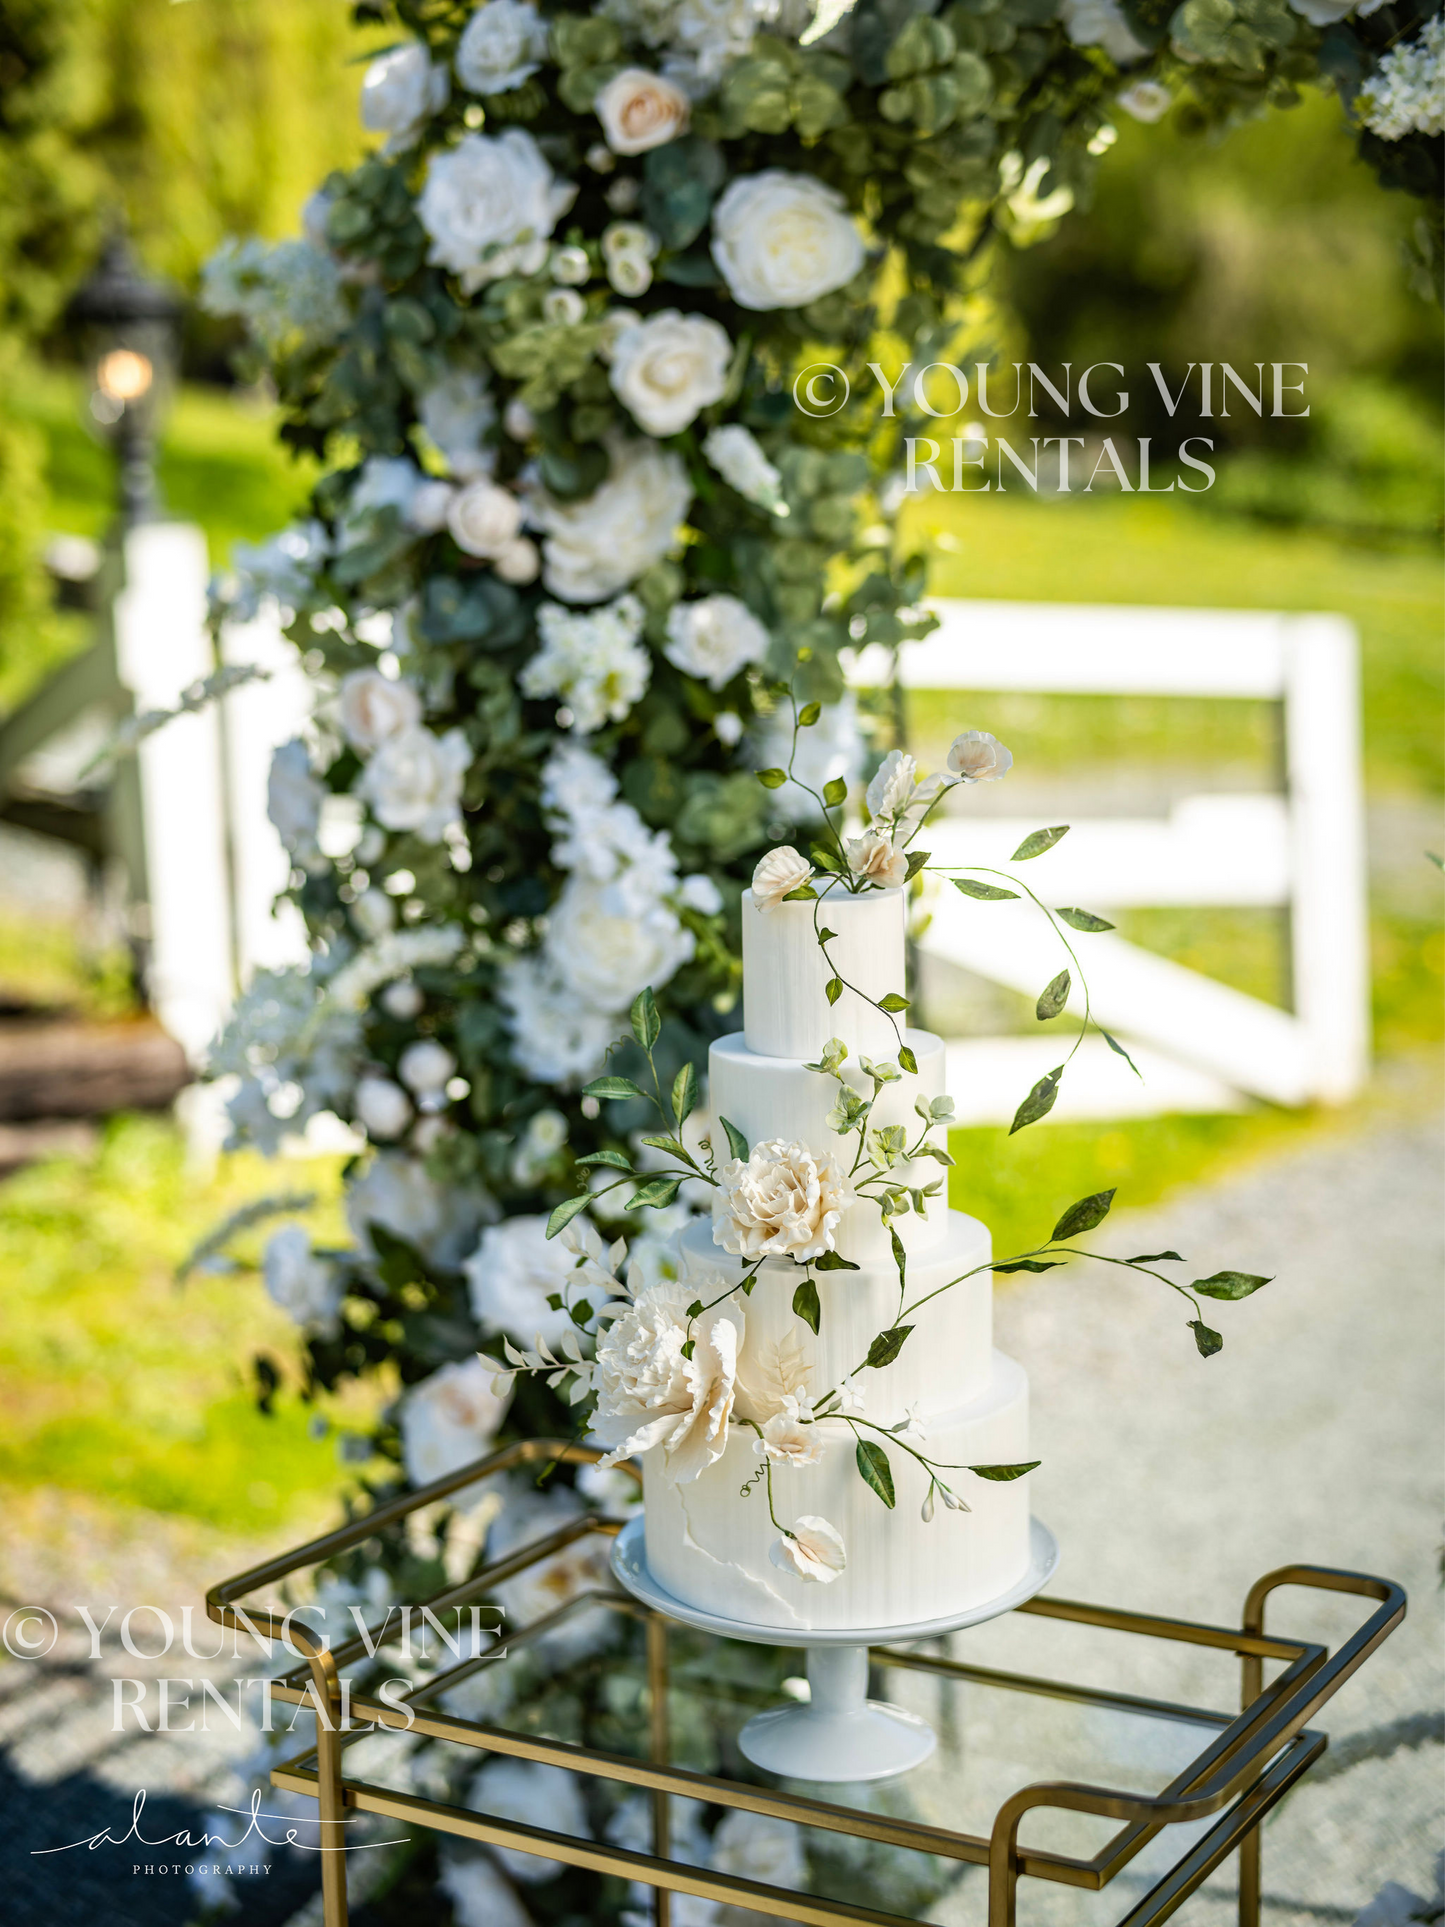 Wedding cake with ivory and green sugar flowers displayed on a gold bar cart, in front of a lush floral arbor at an outdoor winery wedding. The wedding arch in the background is studded with an abundance of ivory and white flowers and various types of eucalyptus foliage.